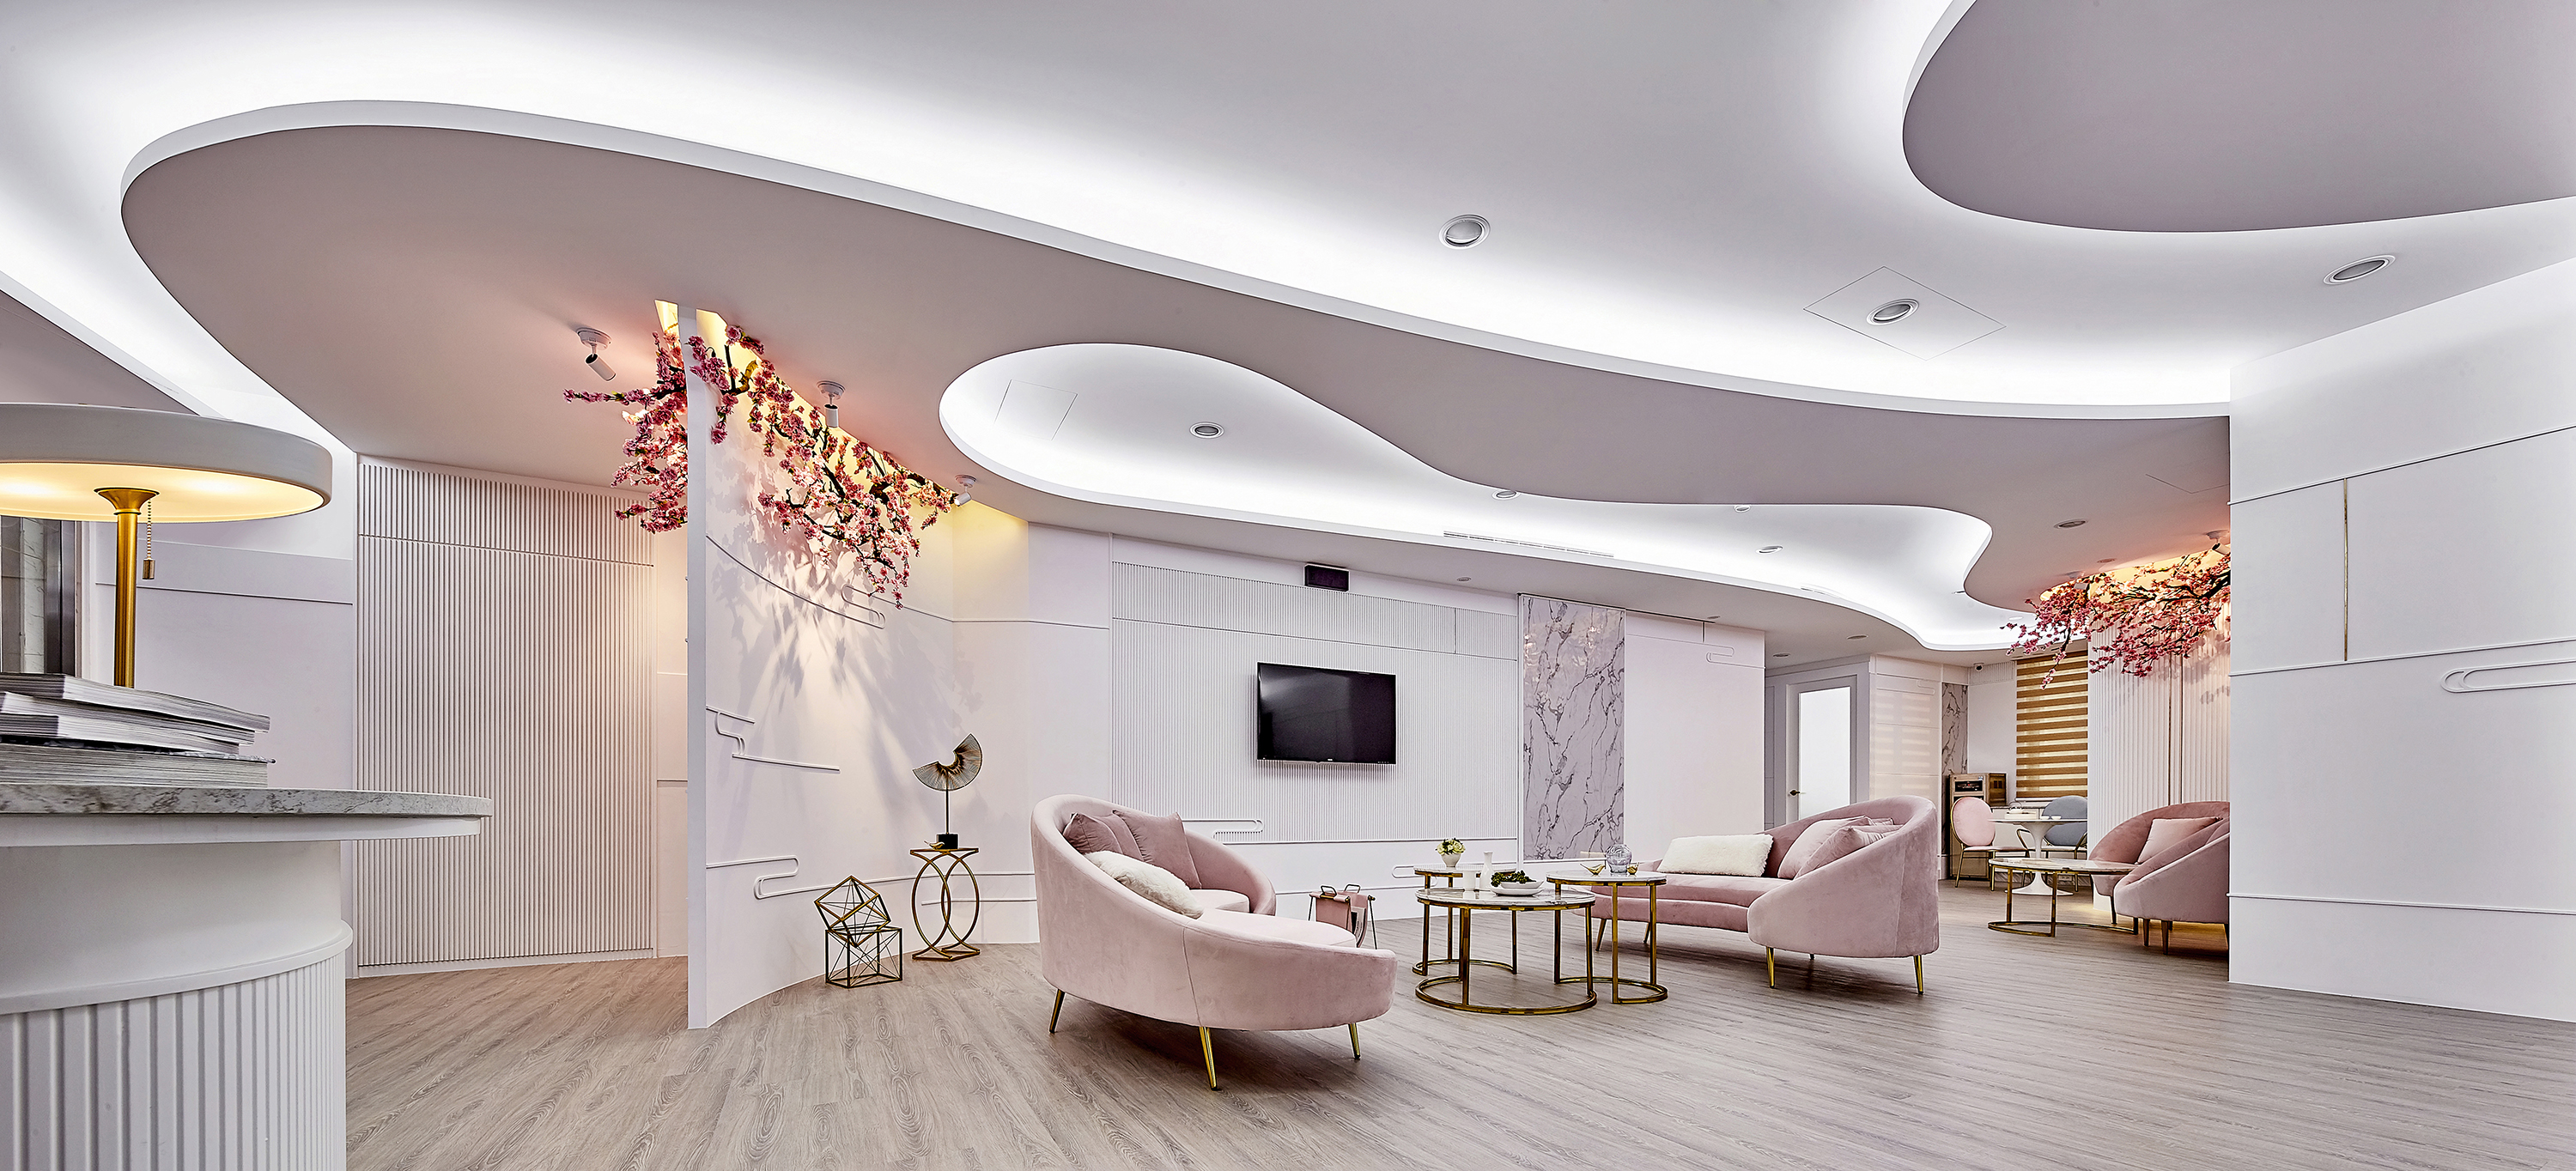 MUSE Design Winners - The Blossom Clinic